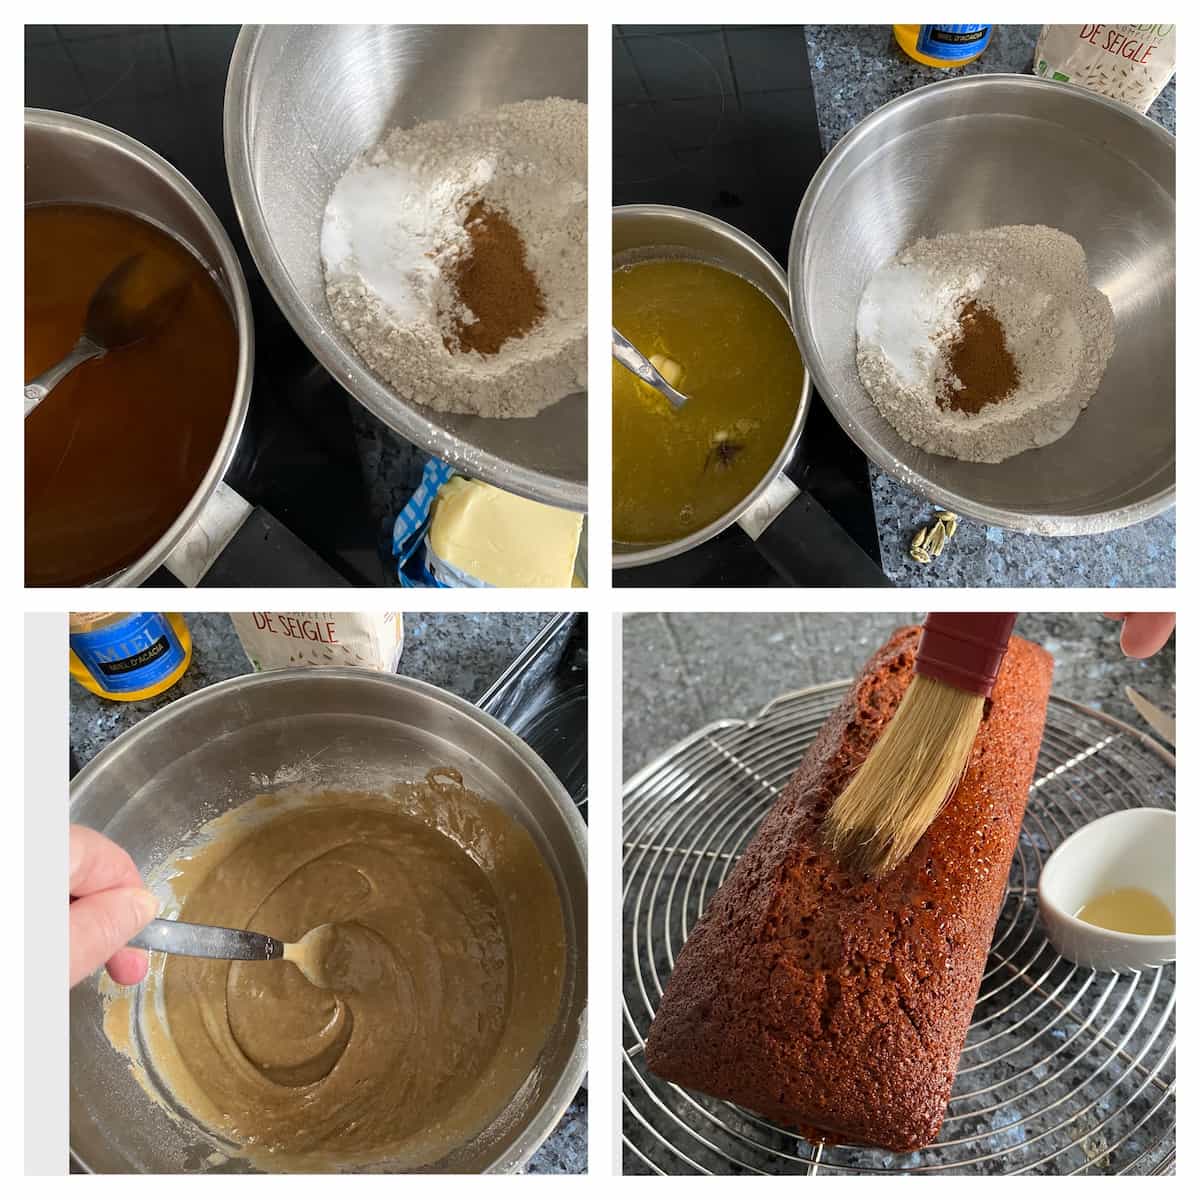 step by step heating honey, water, sugar and spices and mixing with flour and baking soda to make a gingerbread loaf